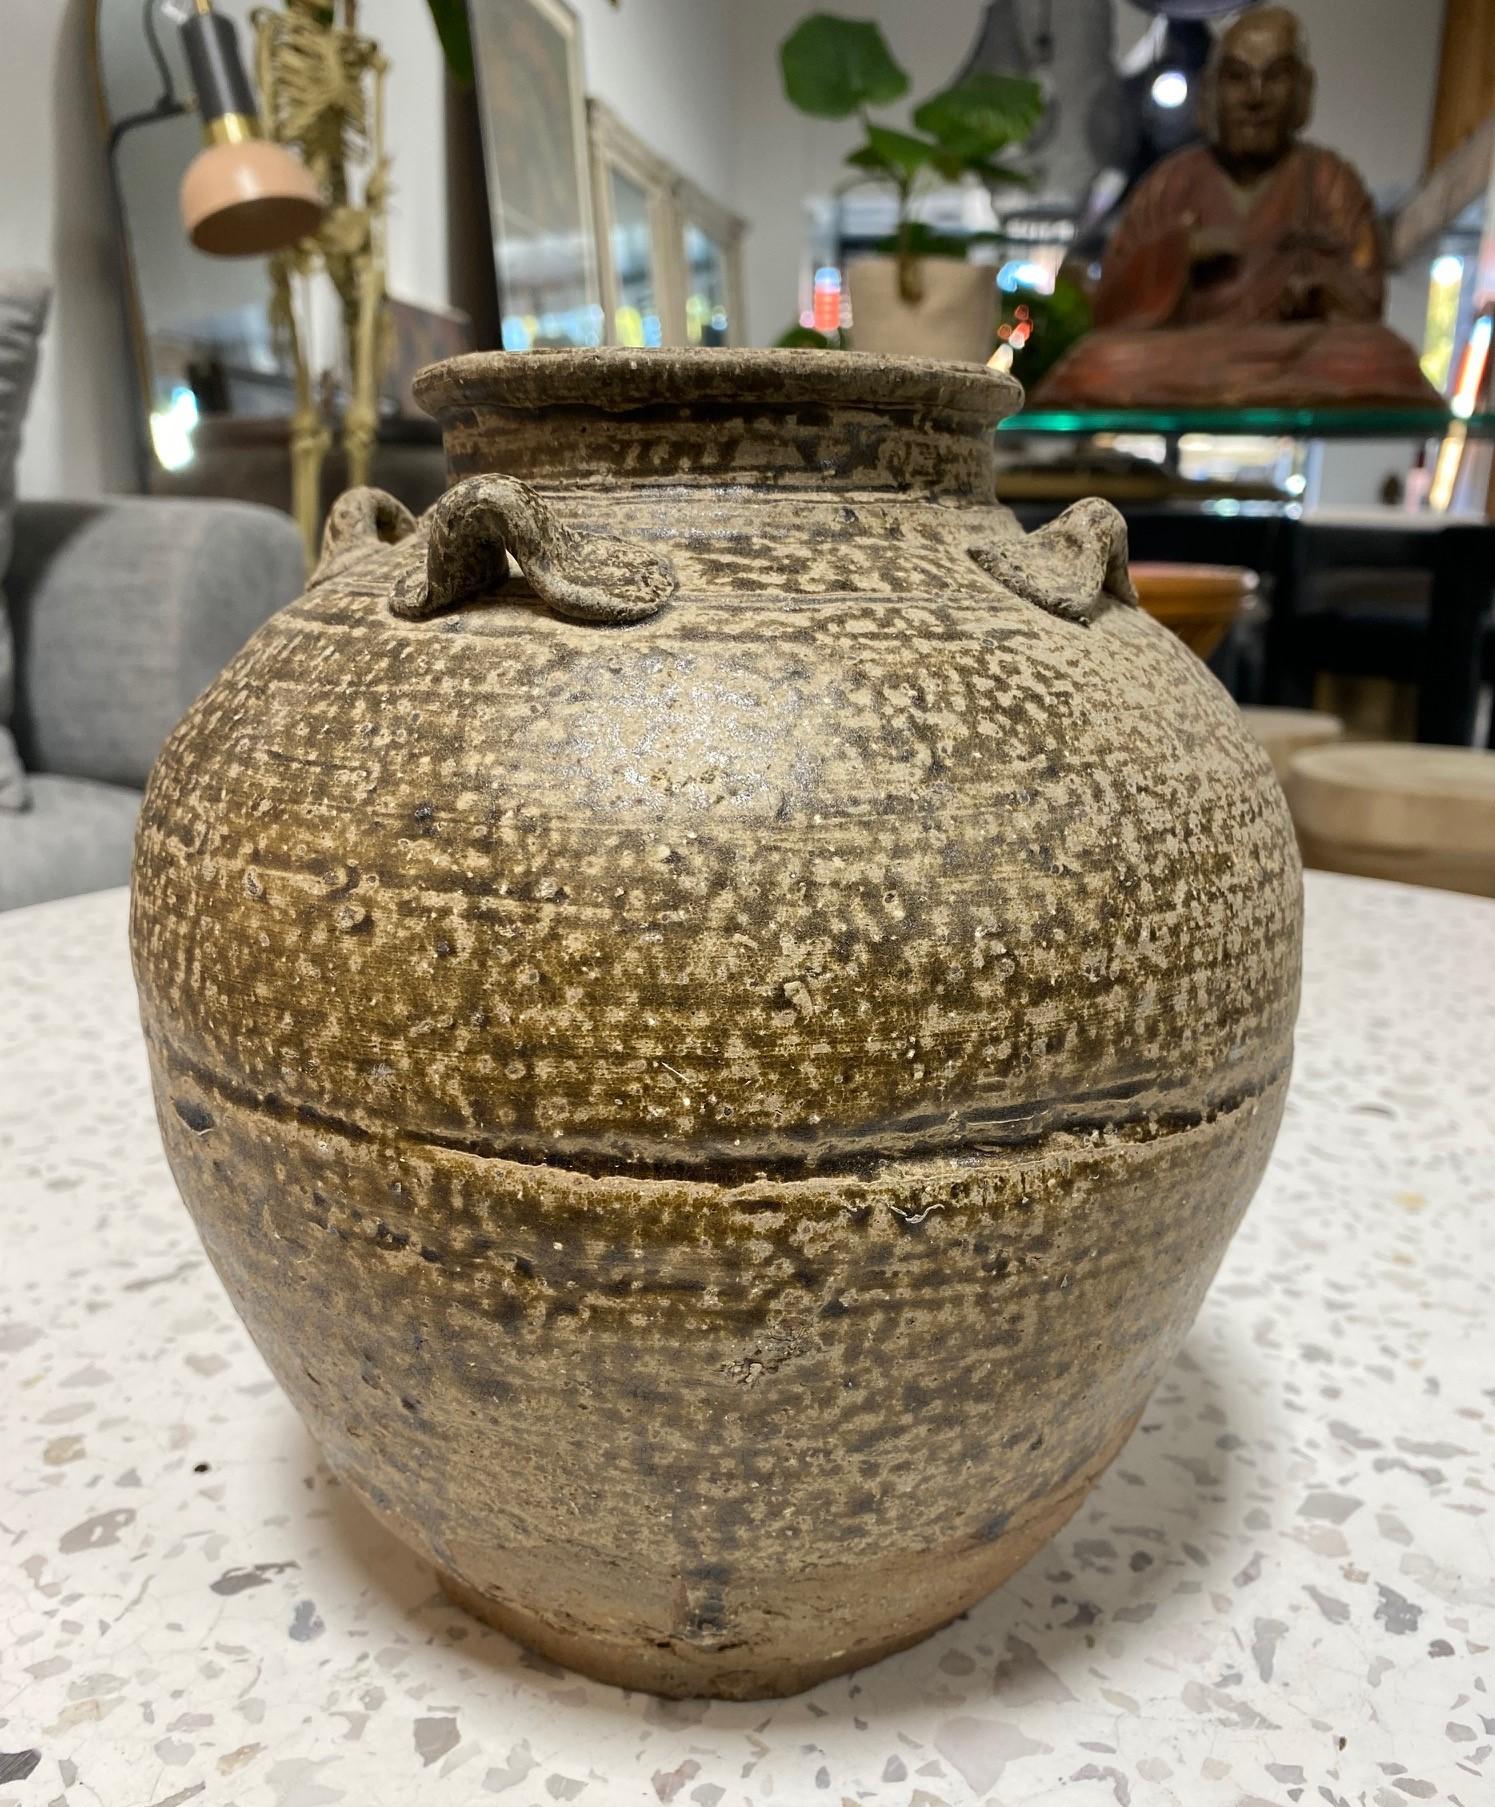 A beautiful Tamba (Tanba) ware (or Sigaraki ware) Japanese pottery vase/jar/pot - produced sometime during the Edo Period (1603-1867). Tamba-yaki ware is a type of Japanese pottery and ceramics produced in Sasayama and Tachikui in Hyogo Prefecture,